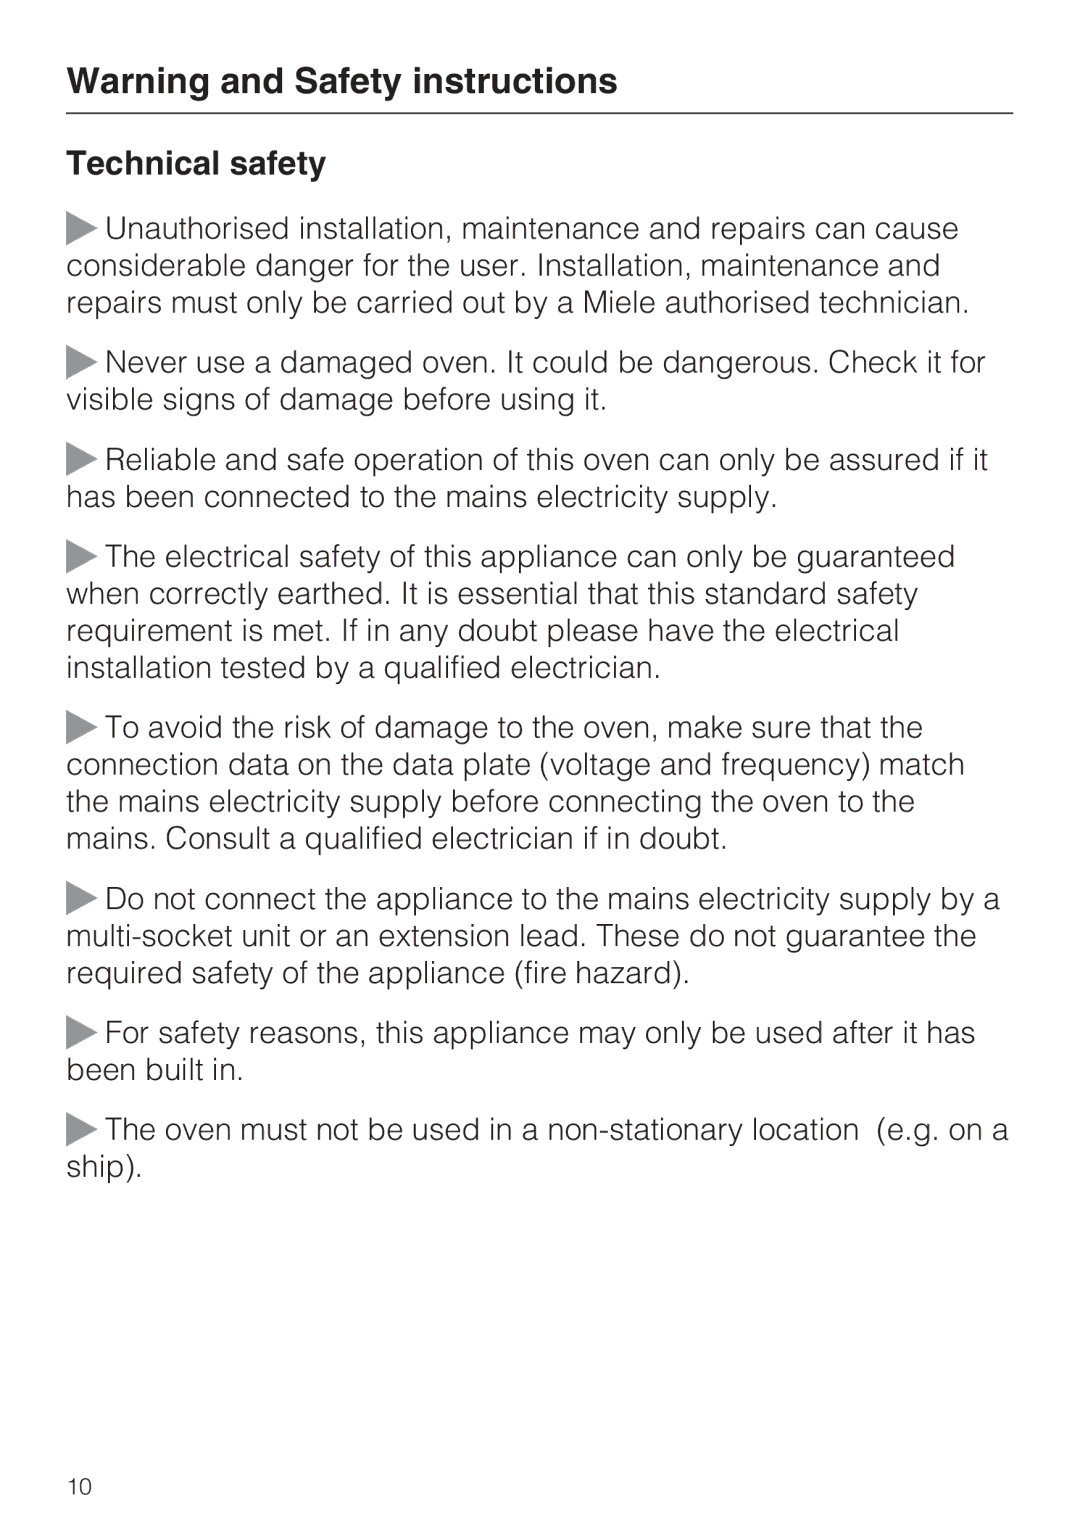 Miele 10 110 510 installation instructions Technical safety 